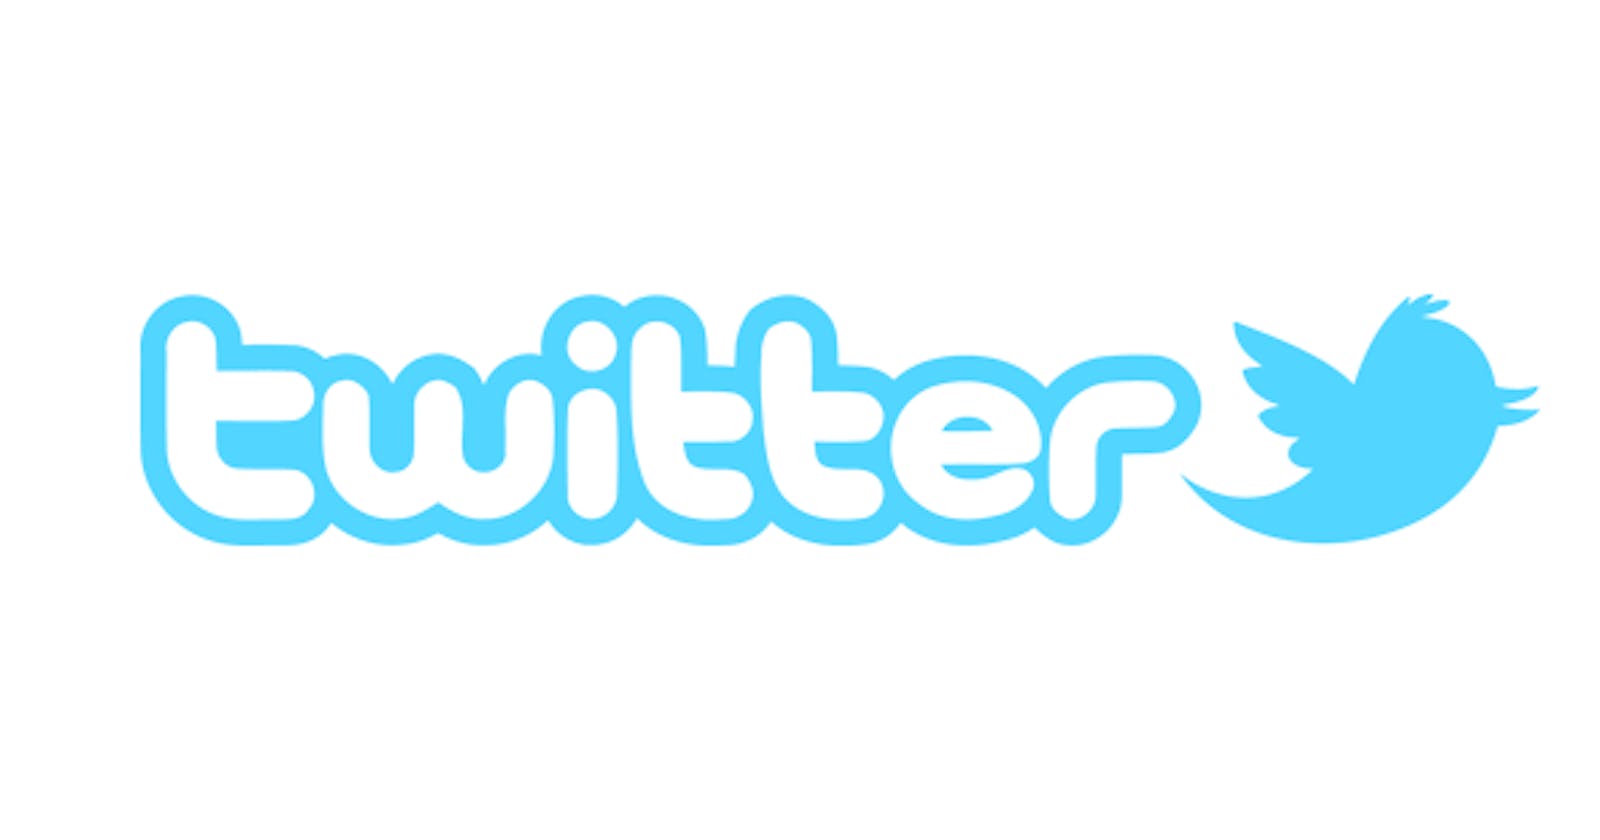 Twitter: Automate updating follower count in your name